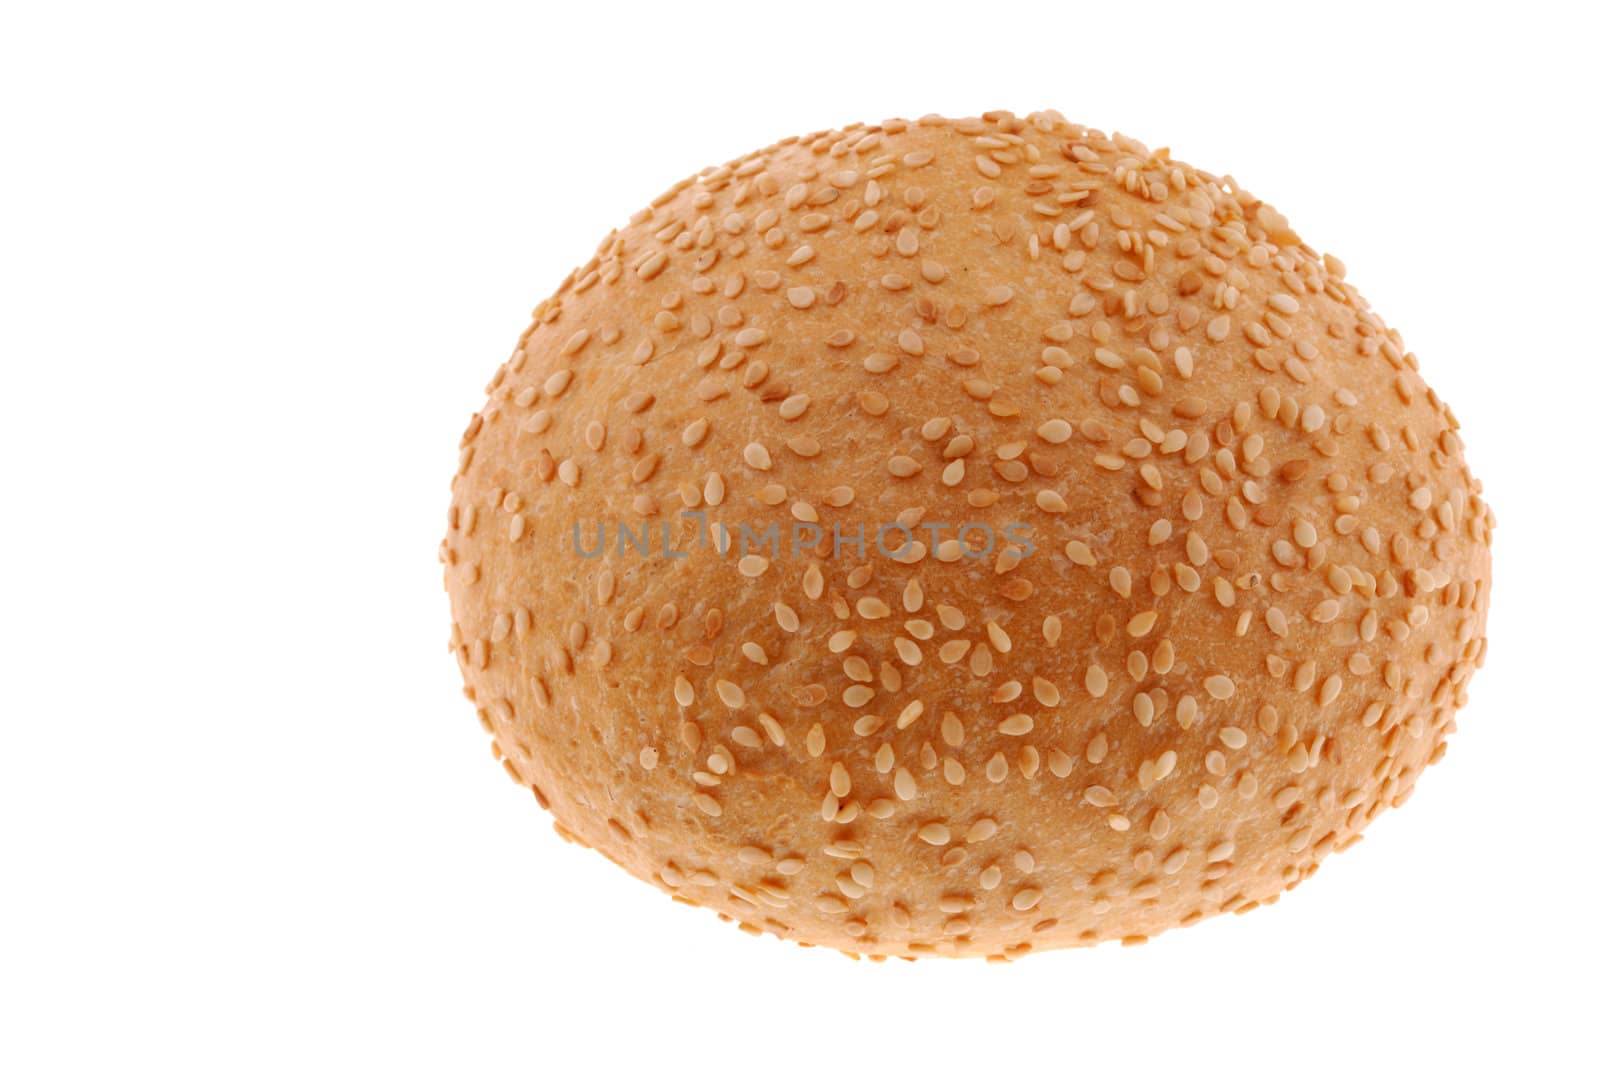 bun for sandwich. A bakery product strewed by grains